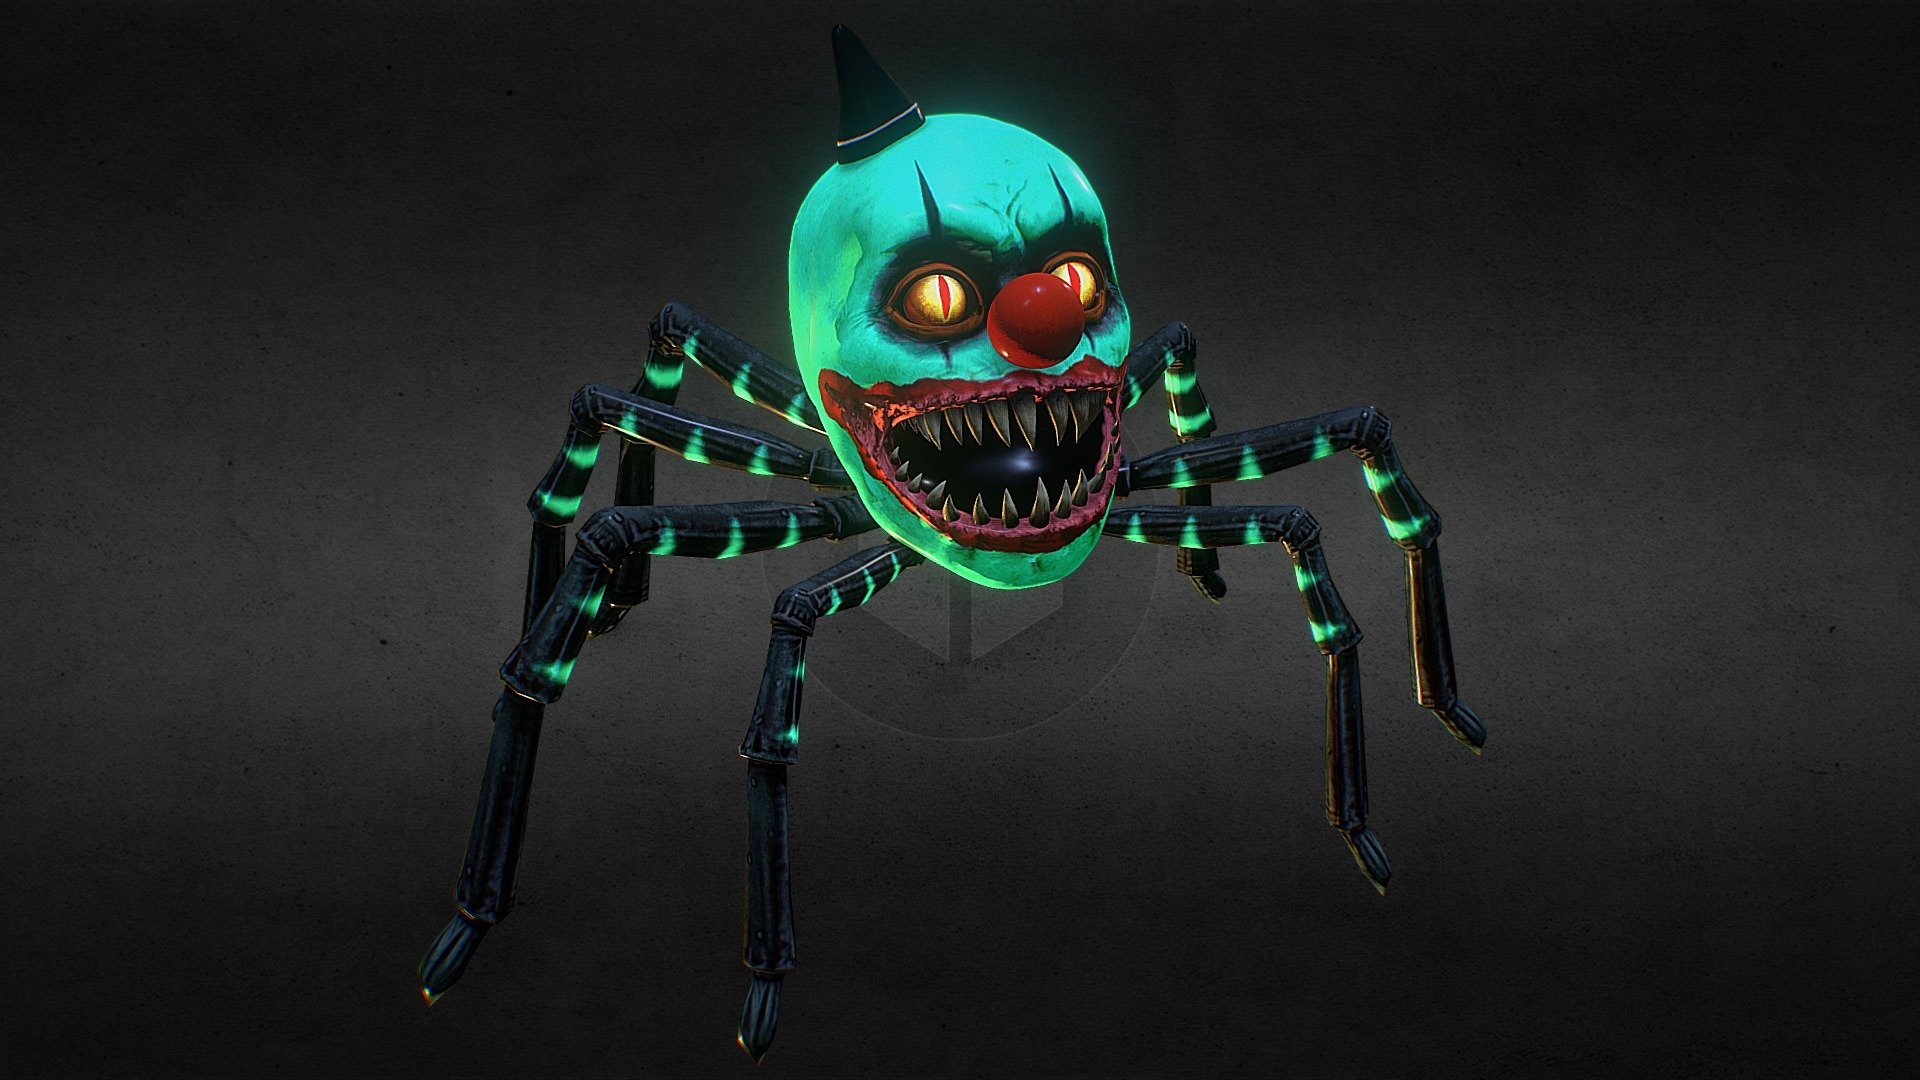 This Is The Clown Gremlin Spider From Dark Deception Monsters And Mortals. Model And Character Made By Glowstick Entertainment! This Is The Offical Model From The Game Files. This Version Of The Model Does Not Have A Rig 3d model